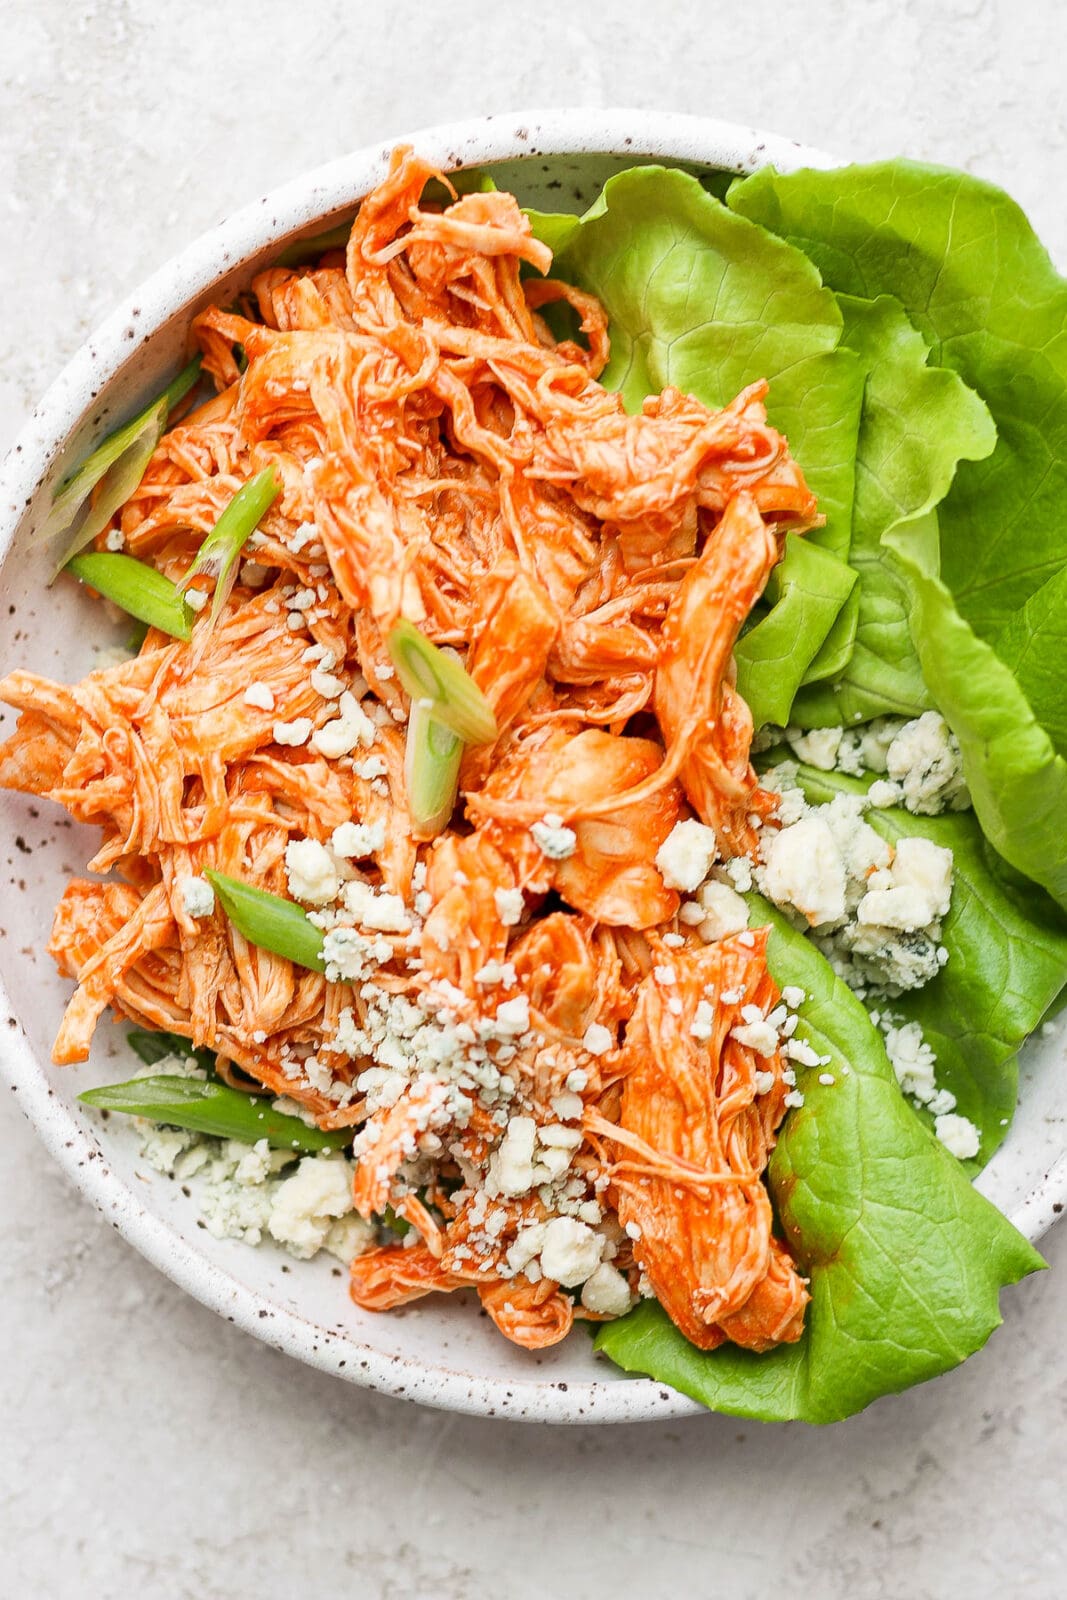 Plate with shredded buffalo chicken on butter lettuce with green onions and blue cheese crumbles.